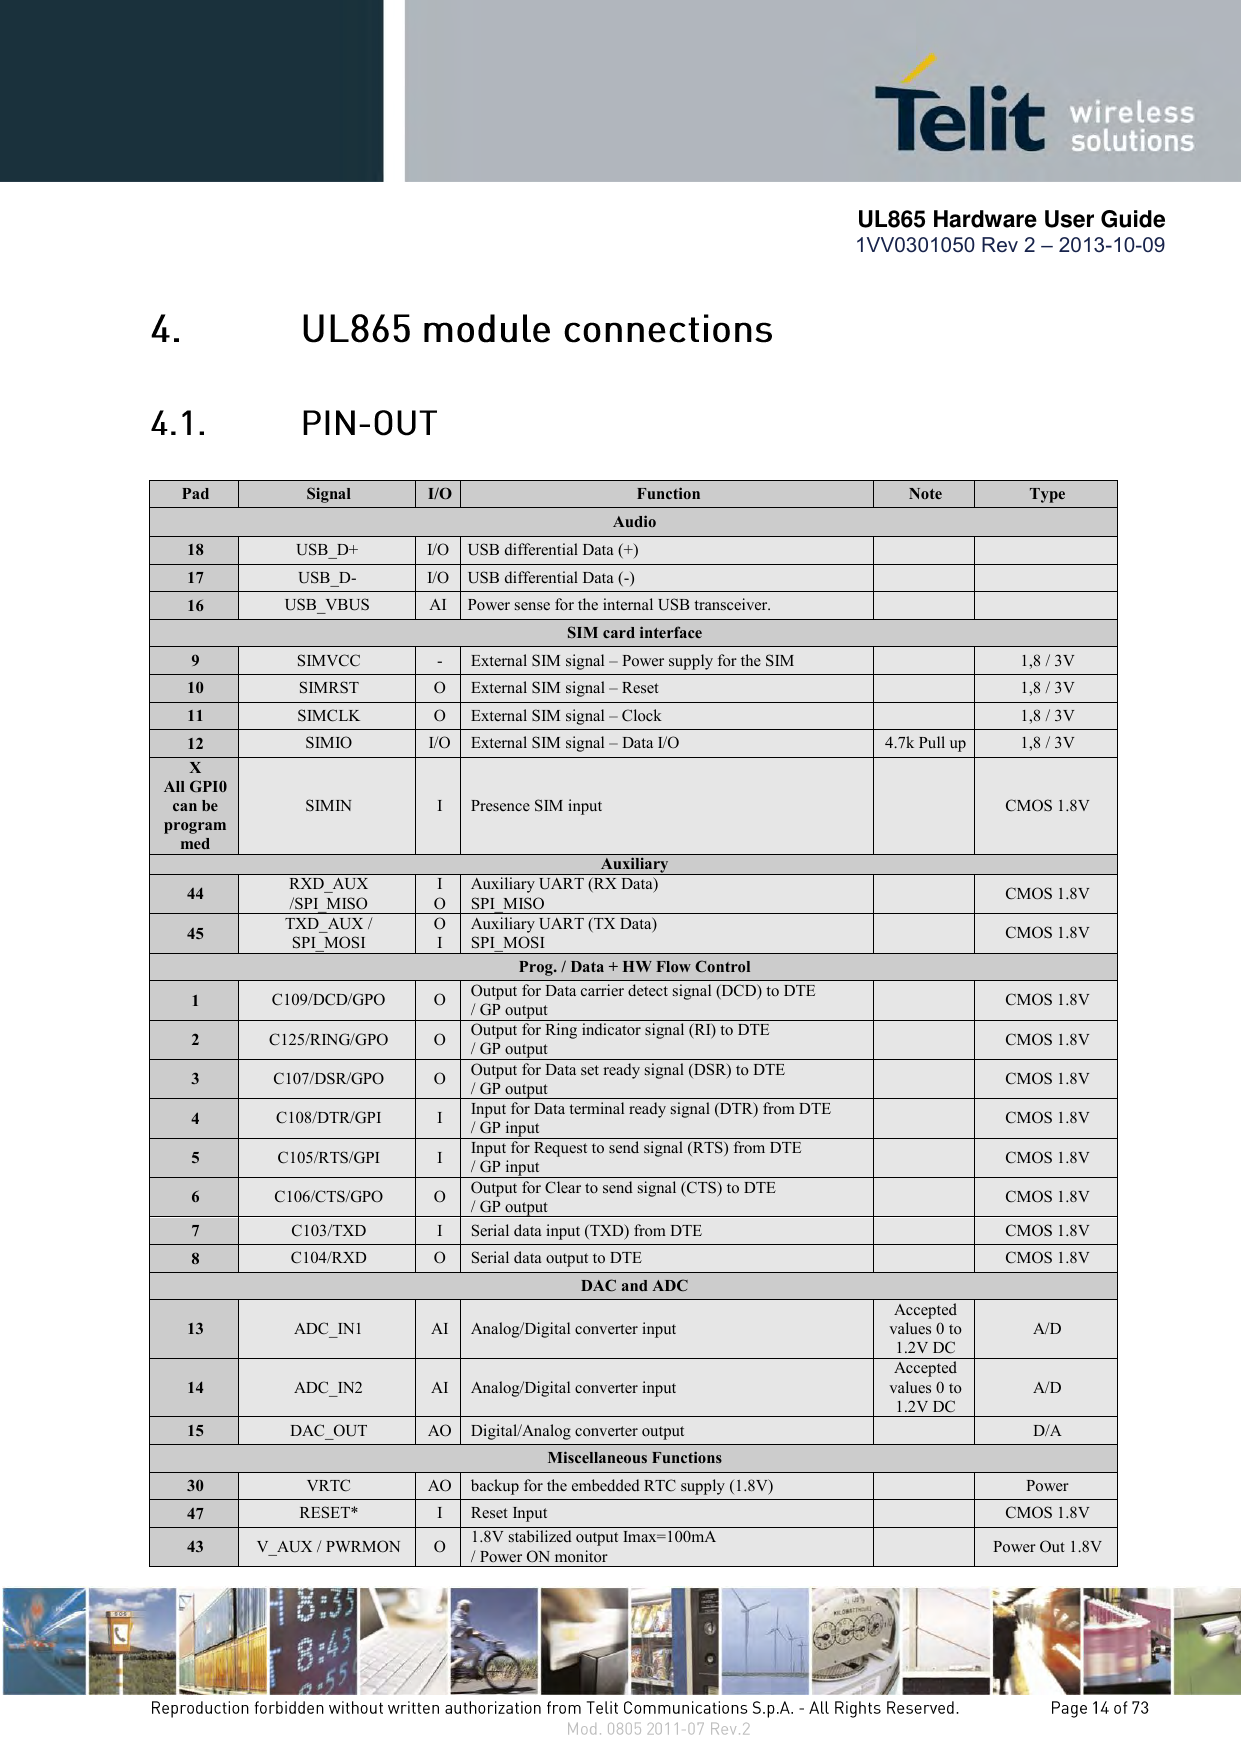       UL865 Hardware User Guide 1VV0301050 Rev 2 – 2013-10-09     Pad Signal I/O Function Note Type Audio 18 USB_D+ I/O USB differential Data (+)   17 USB_D- I/O USB differential Data (-)   16 USB_VBUS AI Power sense for the internal USB transceiver.   SIM card interface 9 SIMVCC - External SIM signal – Power supply for the SIM  1,8 / 3V 10 SIMRST O External SIM signal – Reset  1,8 / 3V 11 SIMCLK O External SIM signal – Clock  1,8 / 3V 12 SIMIO I/O External SIM signal – Data I/O 4.7k Pull up 1,8 / 3V X All GPI0 can be  programmed SIMIN I Presence SIM input  CMOS 1.8V Auxiliary 44 RXD_AUX /SPI_MISO I O Auxiliary UART (RX Data) SPI_MISO  CMOS 1.8V 45 TXD_AUX / SPI_MOSI O I Auxiliary UART (TX Data) SPI_MOSI  CMOS 1.8V Prog. / Data + HW Flow Control 1 C109/DCD/GPO O Output for Data carrier detect signal (DCD) to DTE  / GP output  CMOS 1.8V 2 C125/RING/GPO O Output for Ring indicator signal (RI) to DTE / GP output  CMOS 1.8V 3 C107/DSR/GPO O Output for Data set ready signal (DSR) to DTE / GP output  CMOS 1.8V 4 C108/DTR/GPI I Input for Data terminal ready signal (DTR) from DTE / GP input  CMOS 1.8V 5 C105/RTS/GPI I Input for Request to send signal (RTS) from DTE / GP input  CMOS 1.8V 6 C106/CTS/GPO O Output for Clear to send signal (CTS) to DTE / GP output  CMOS 1.8V 7 C103/TXD I Serial data input (TXD) from DTE  CMOS 1.8V 8 C104/RXD O Serial data output to DTE  CMOS 1.8V DAC and ADC 13 ADC_IN1 AI Analog/Digital converter input Accepted values 0 to 1.2V DC A/D 14 ADC_IN2 AI Analog/Digital converter input Accepted values 0 to 1.2V DC A/D 15 DAC_OUT AO Digital/Analog converter output  D/A Miscellaneous Functions 30 VRTC AO backup for the embedded RTC supply (1.8V)  Power 47 RESET* I Reset Input  CMOS 1.8V 43 V_AUX / PWRMON O 1.8V stabilized output Imax=100mA / Power ON monitor   Power Out 1.8V 